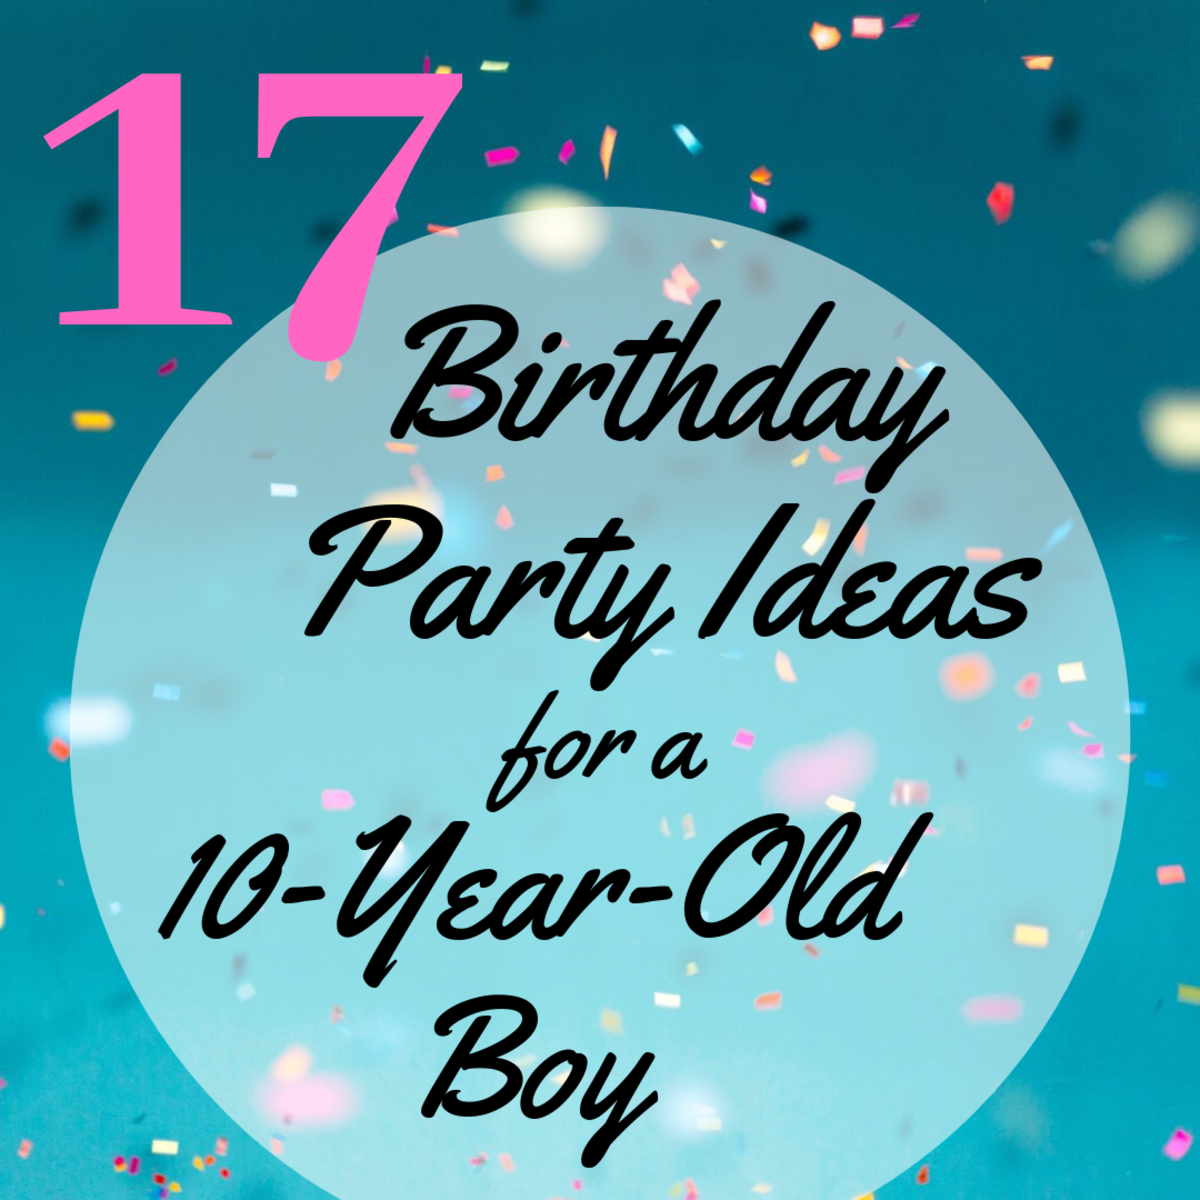 fun-party-ideas-for-17-year-olds-fun-guest